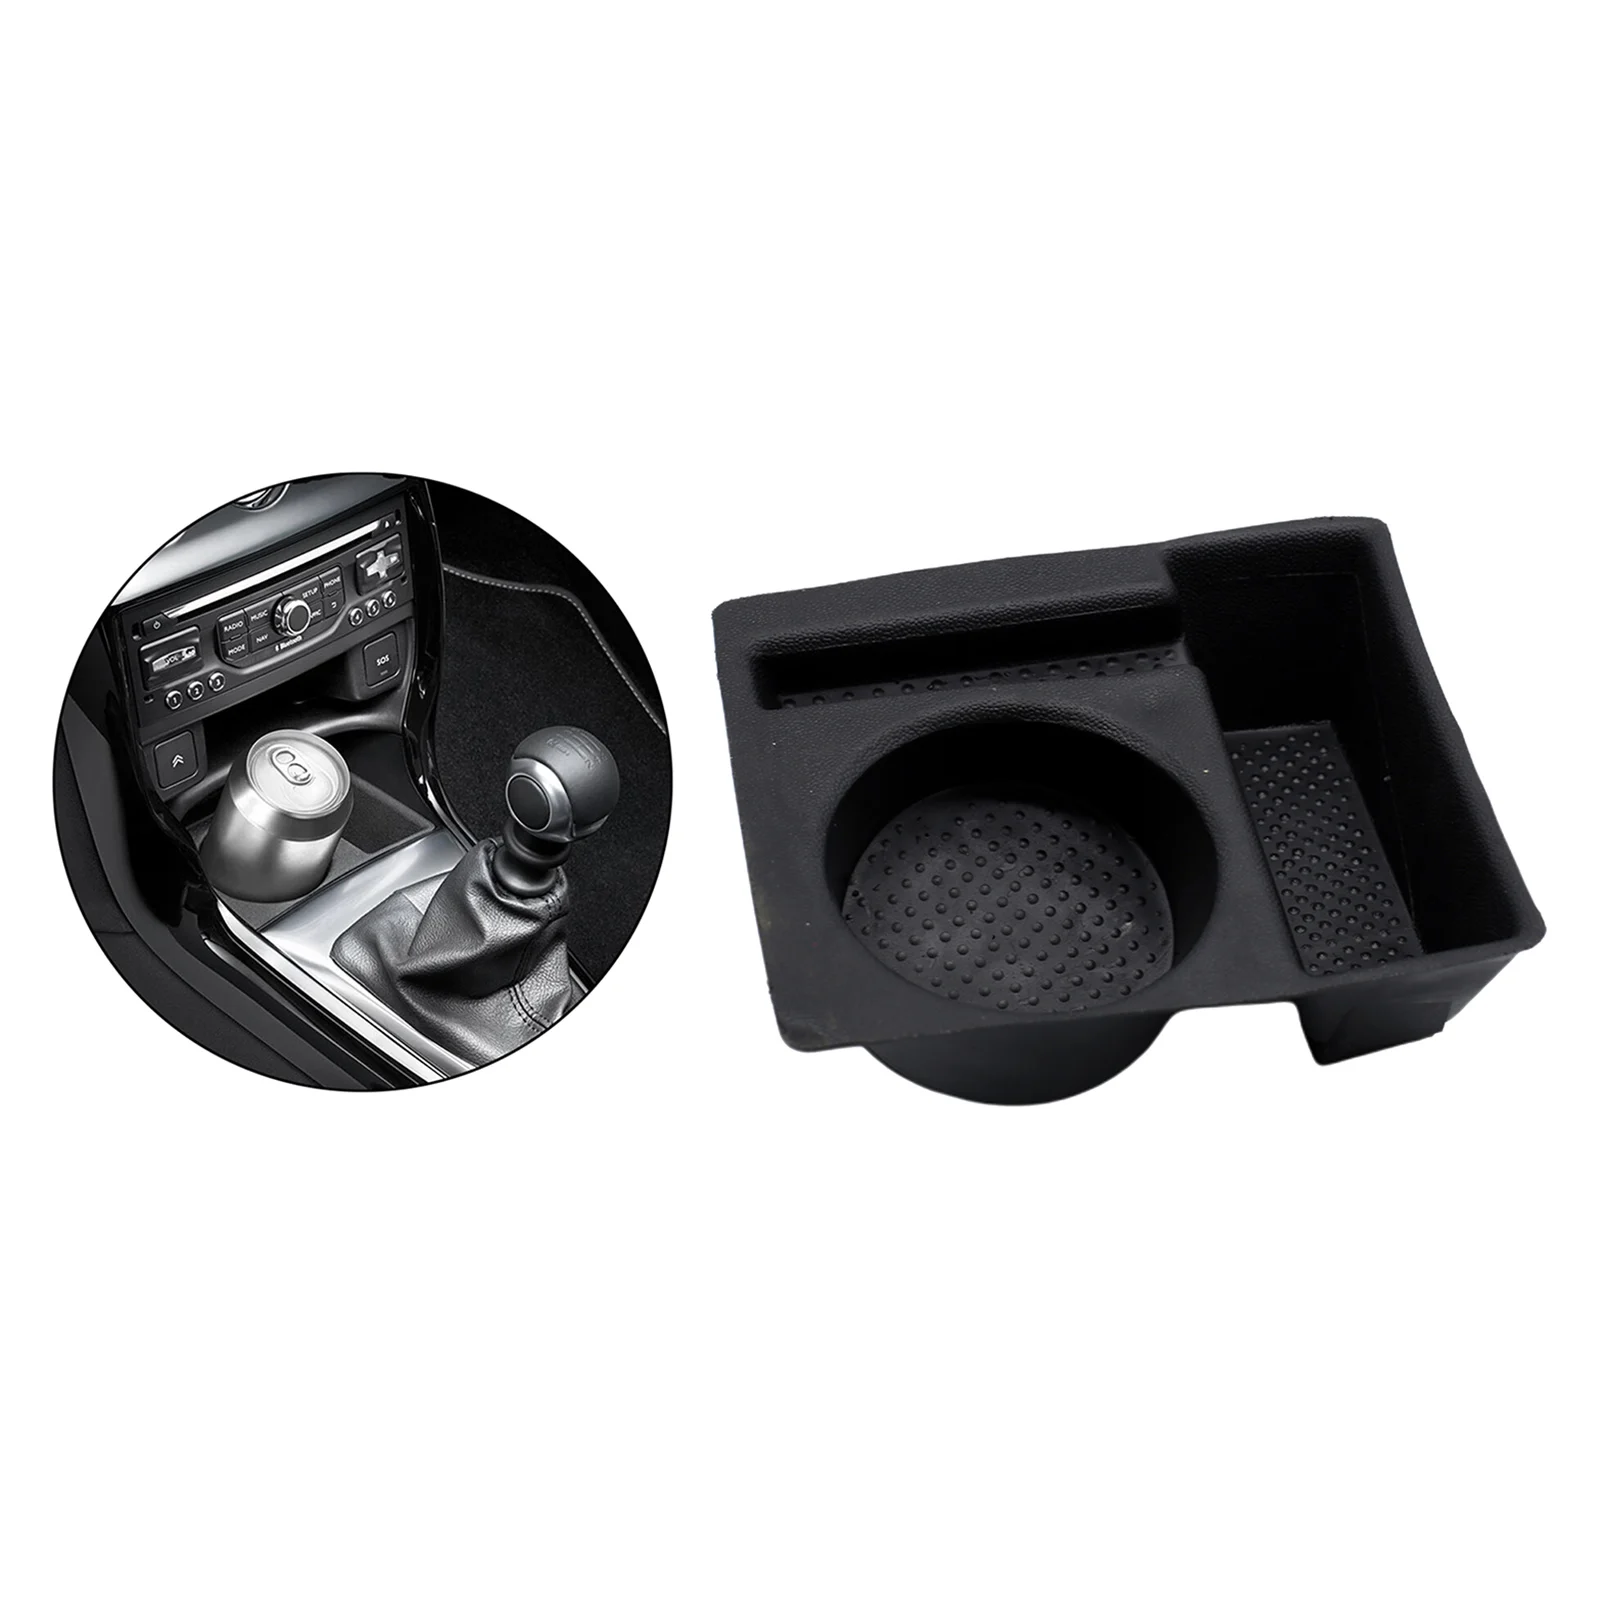 Multifunctional 9425E4 00244872 Cup Holder Tray Ashtray Organizer Replacement Fit for Citroen DS3 Beverage Insert Black